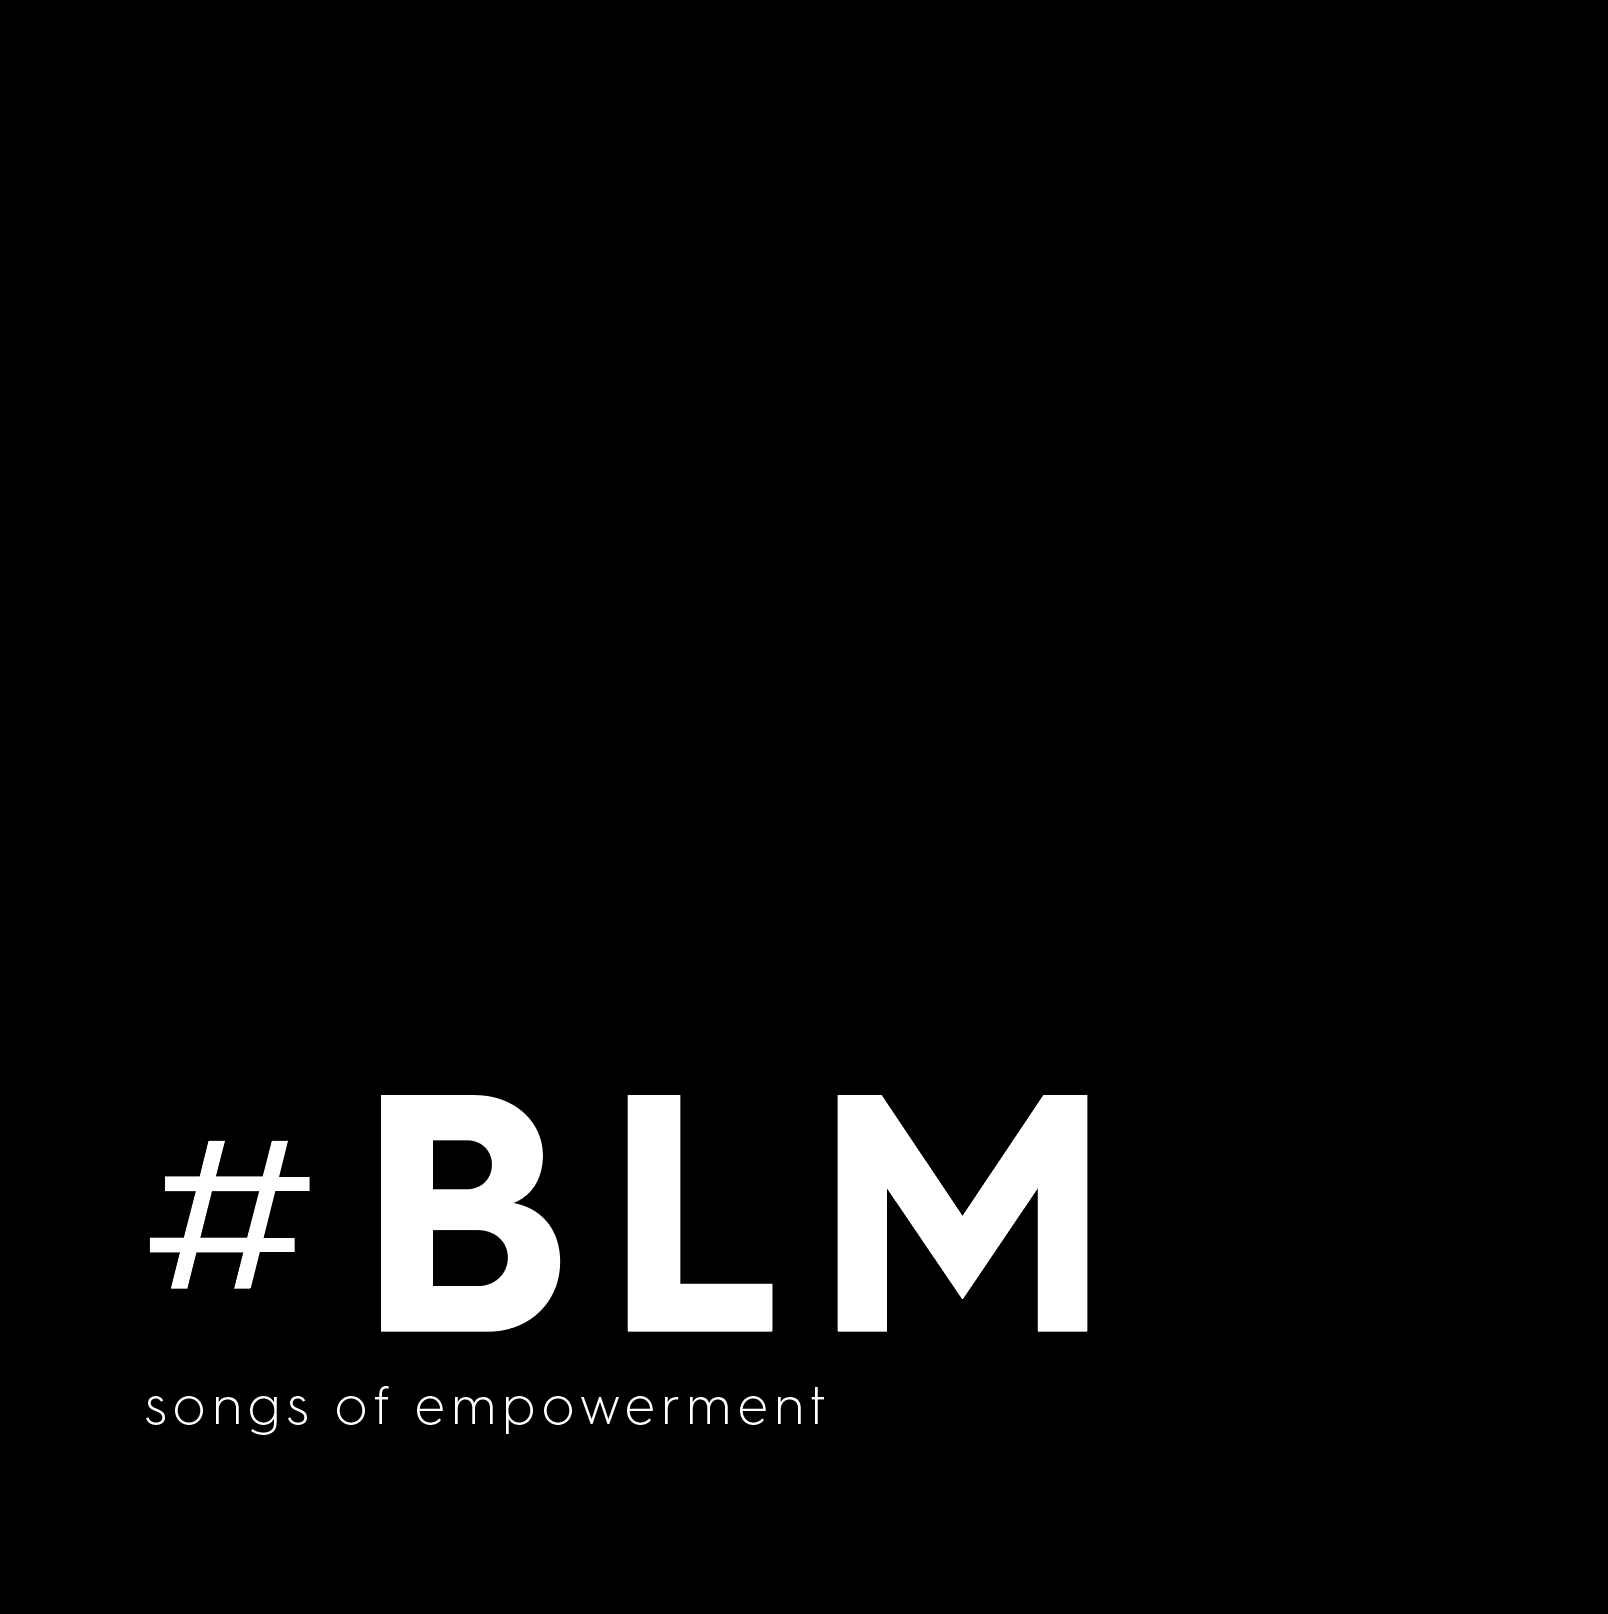 BLM: Songs of Empowerment playlist